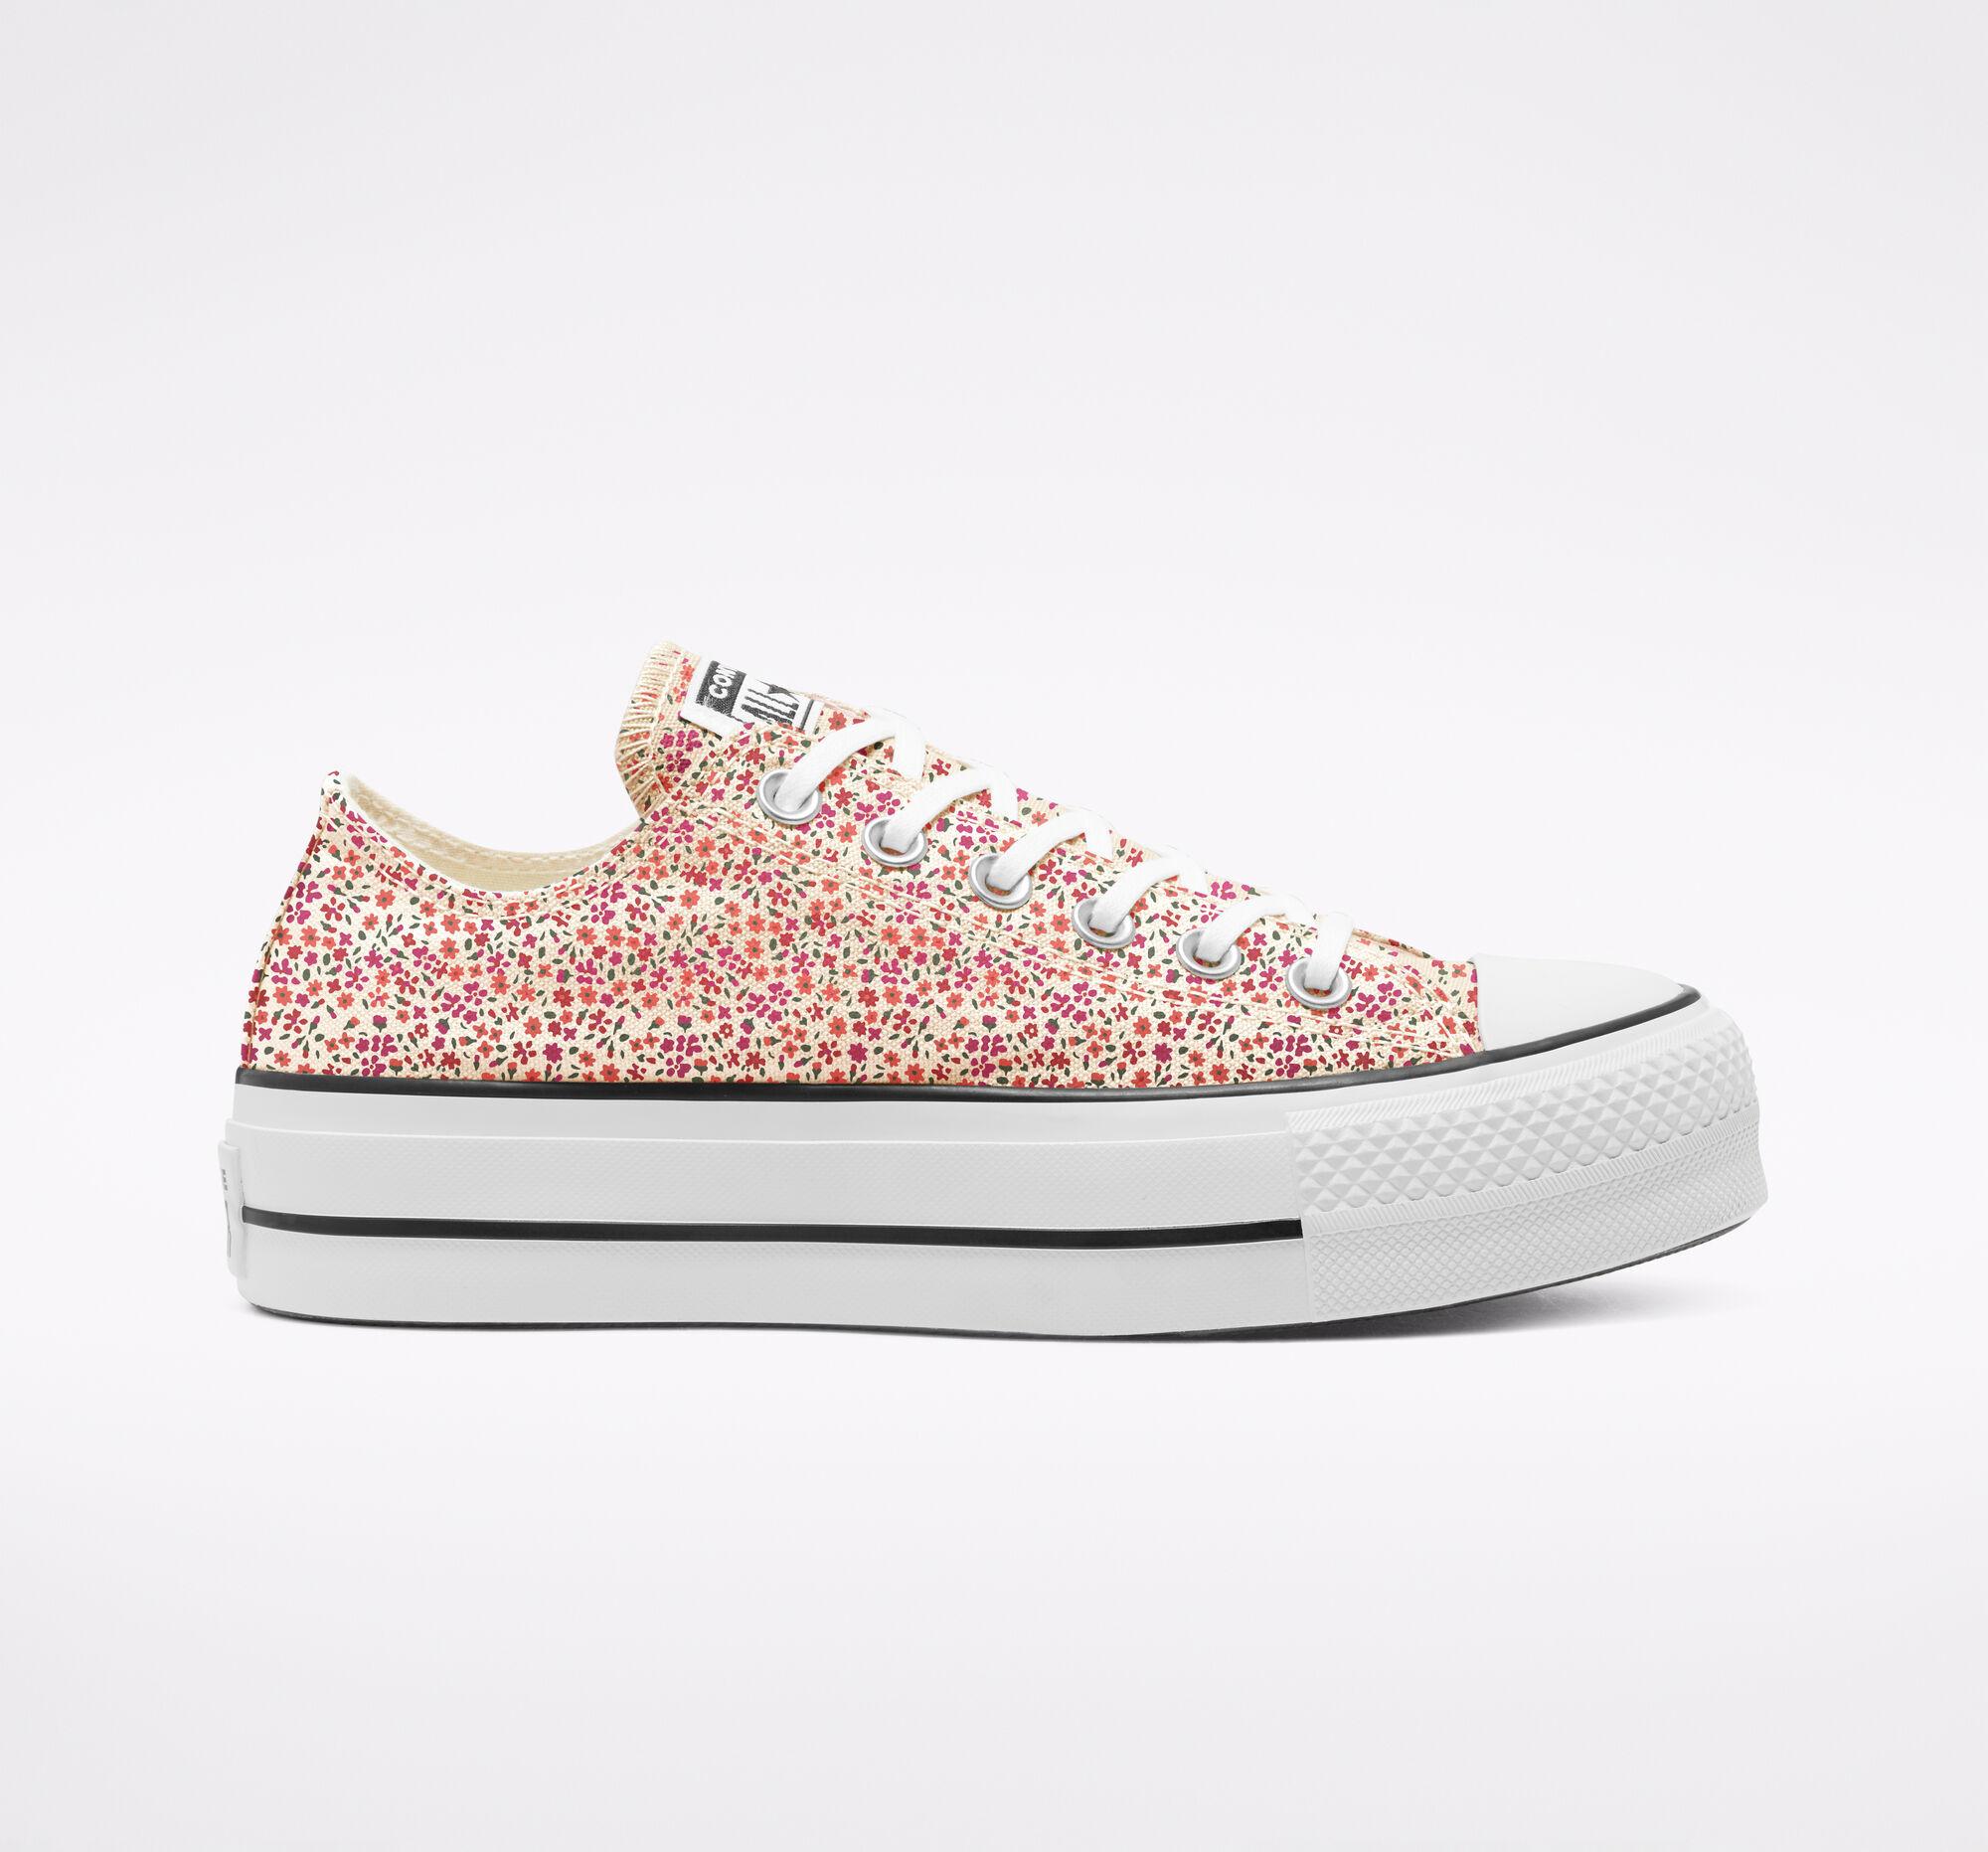 Converse Multicolore Basse Online, SAVE 38% - www.rohdeonsports.com